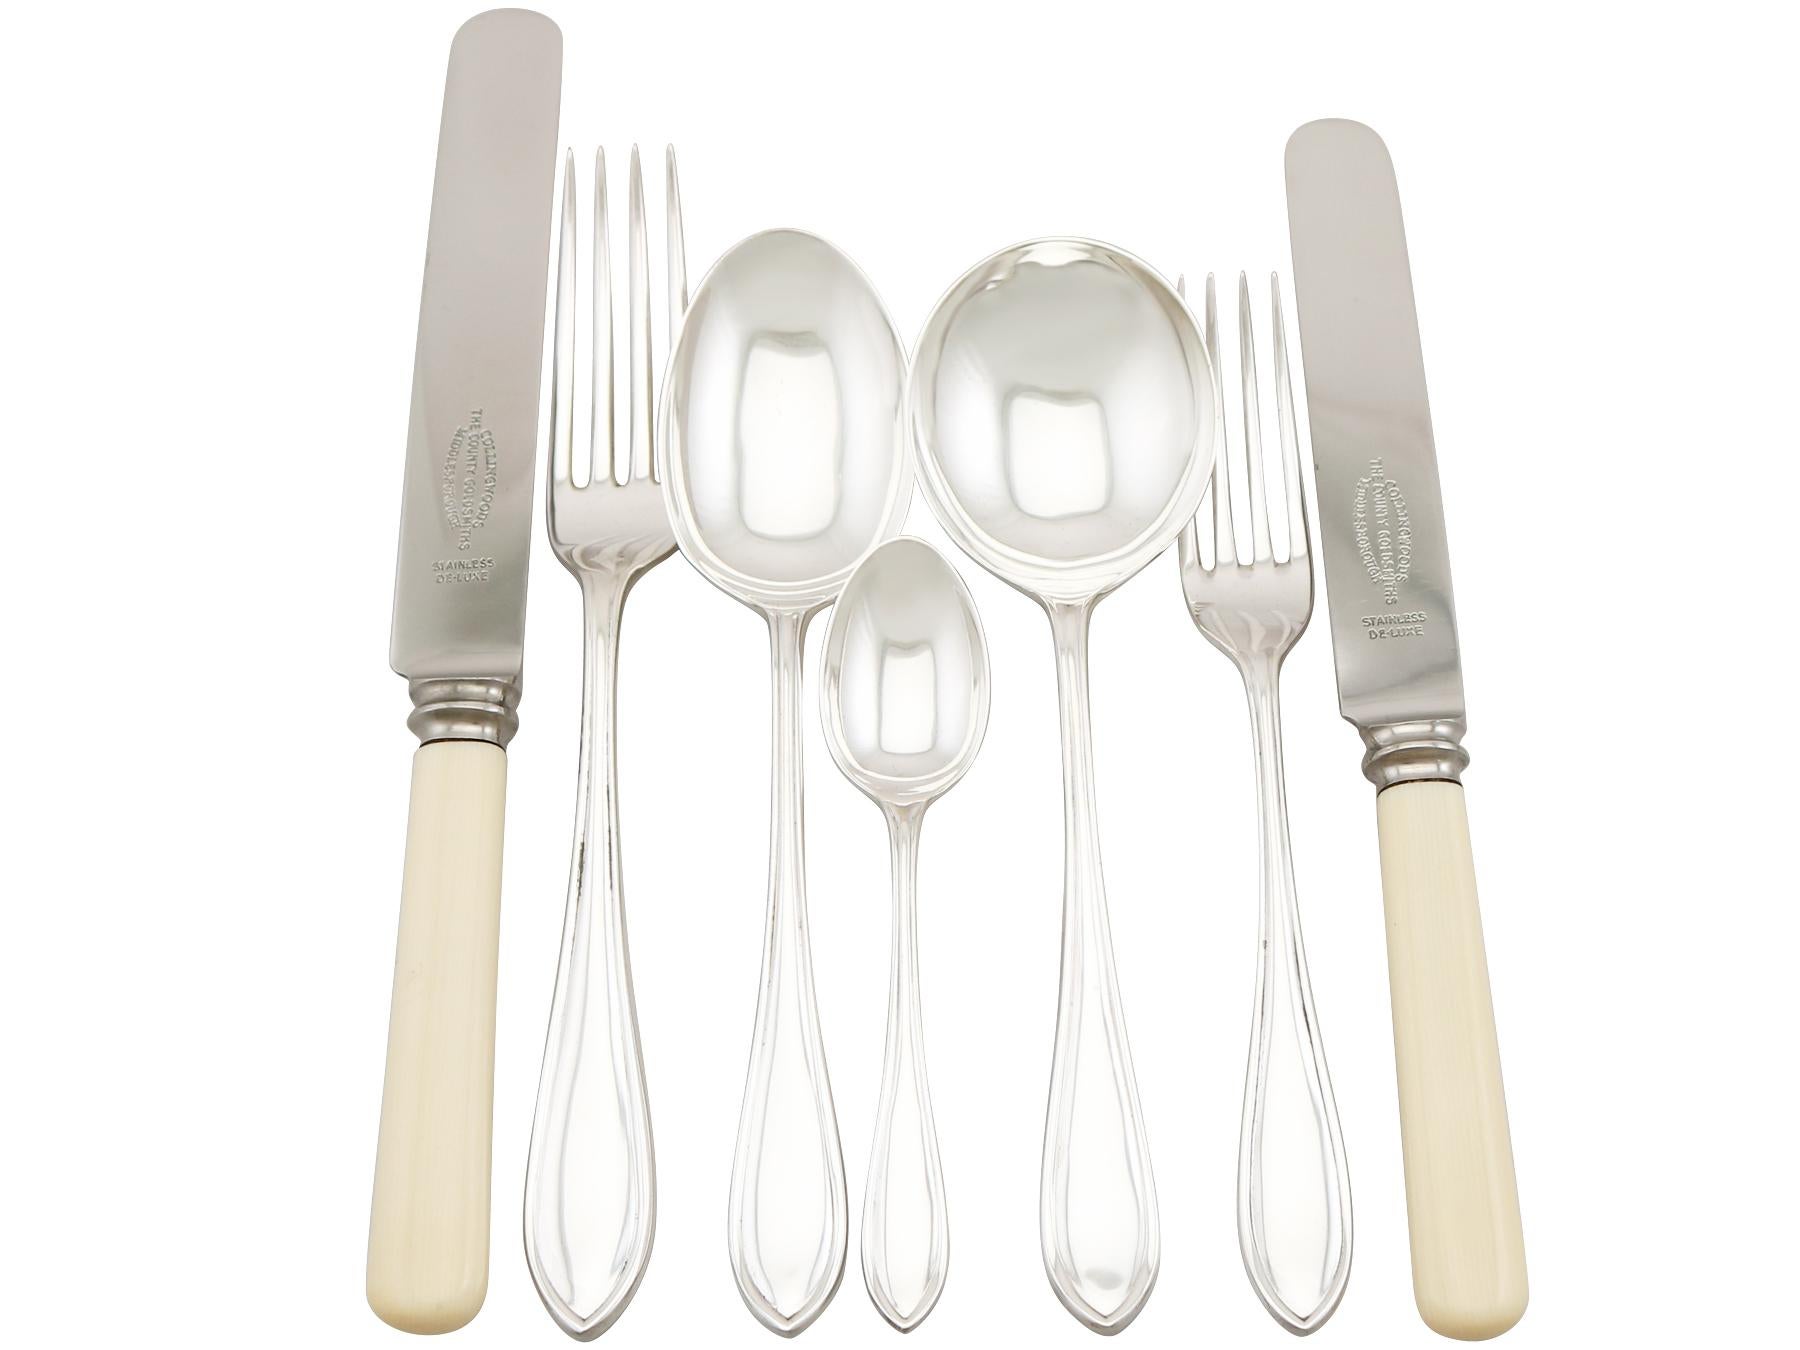 An exceptional, fine and impressive antique George V English straight sterling silver Sandringham pattern flatware service for twelve persons; an addition to our canteen of cutlery collection.

The pieces of this exceptional, antique George V